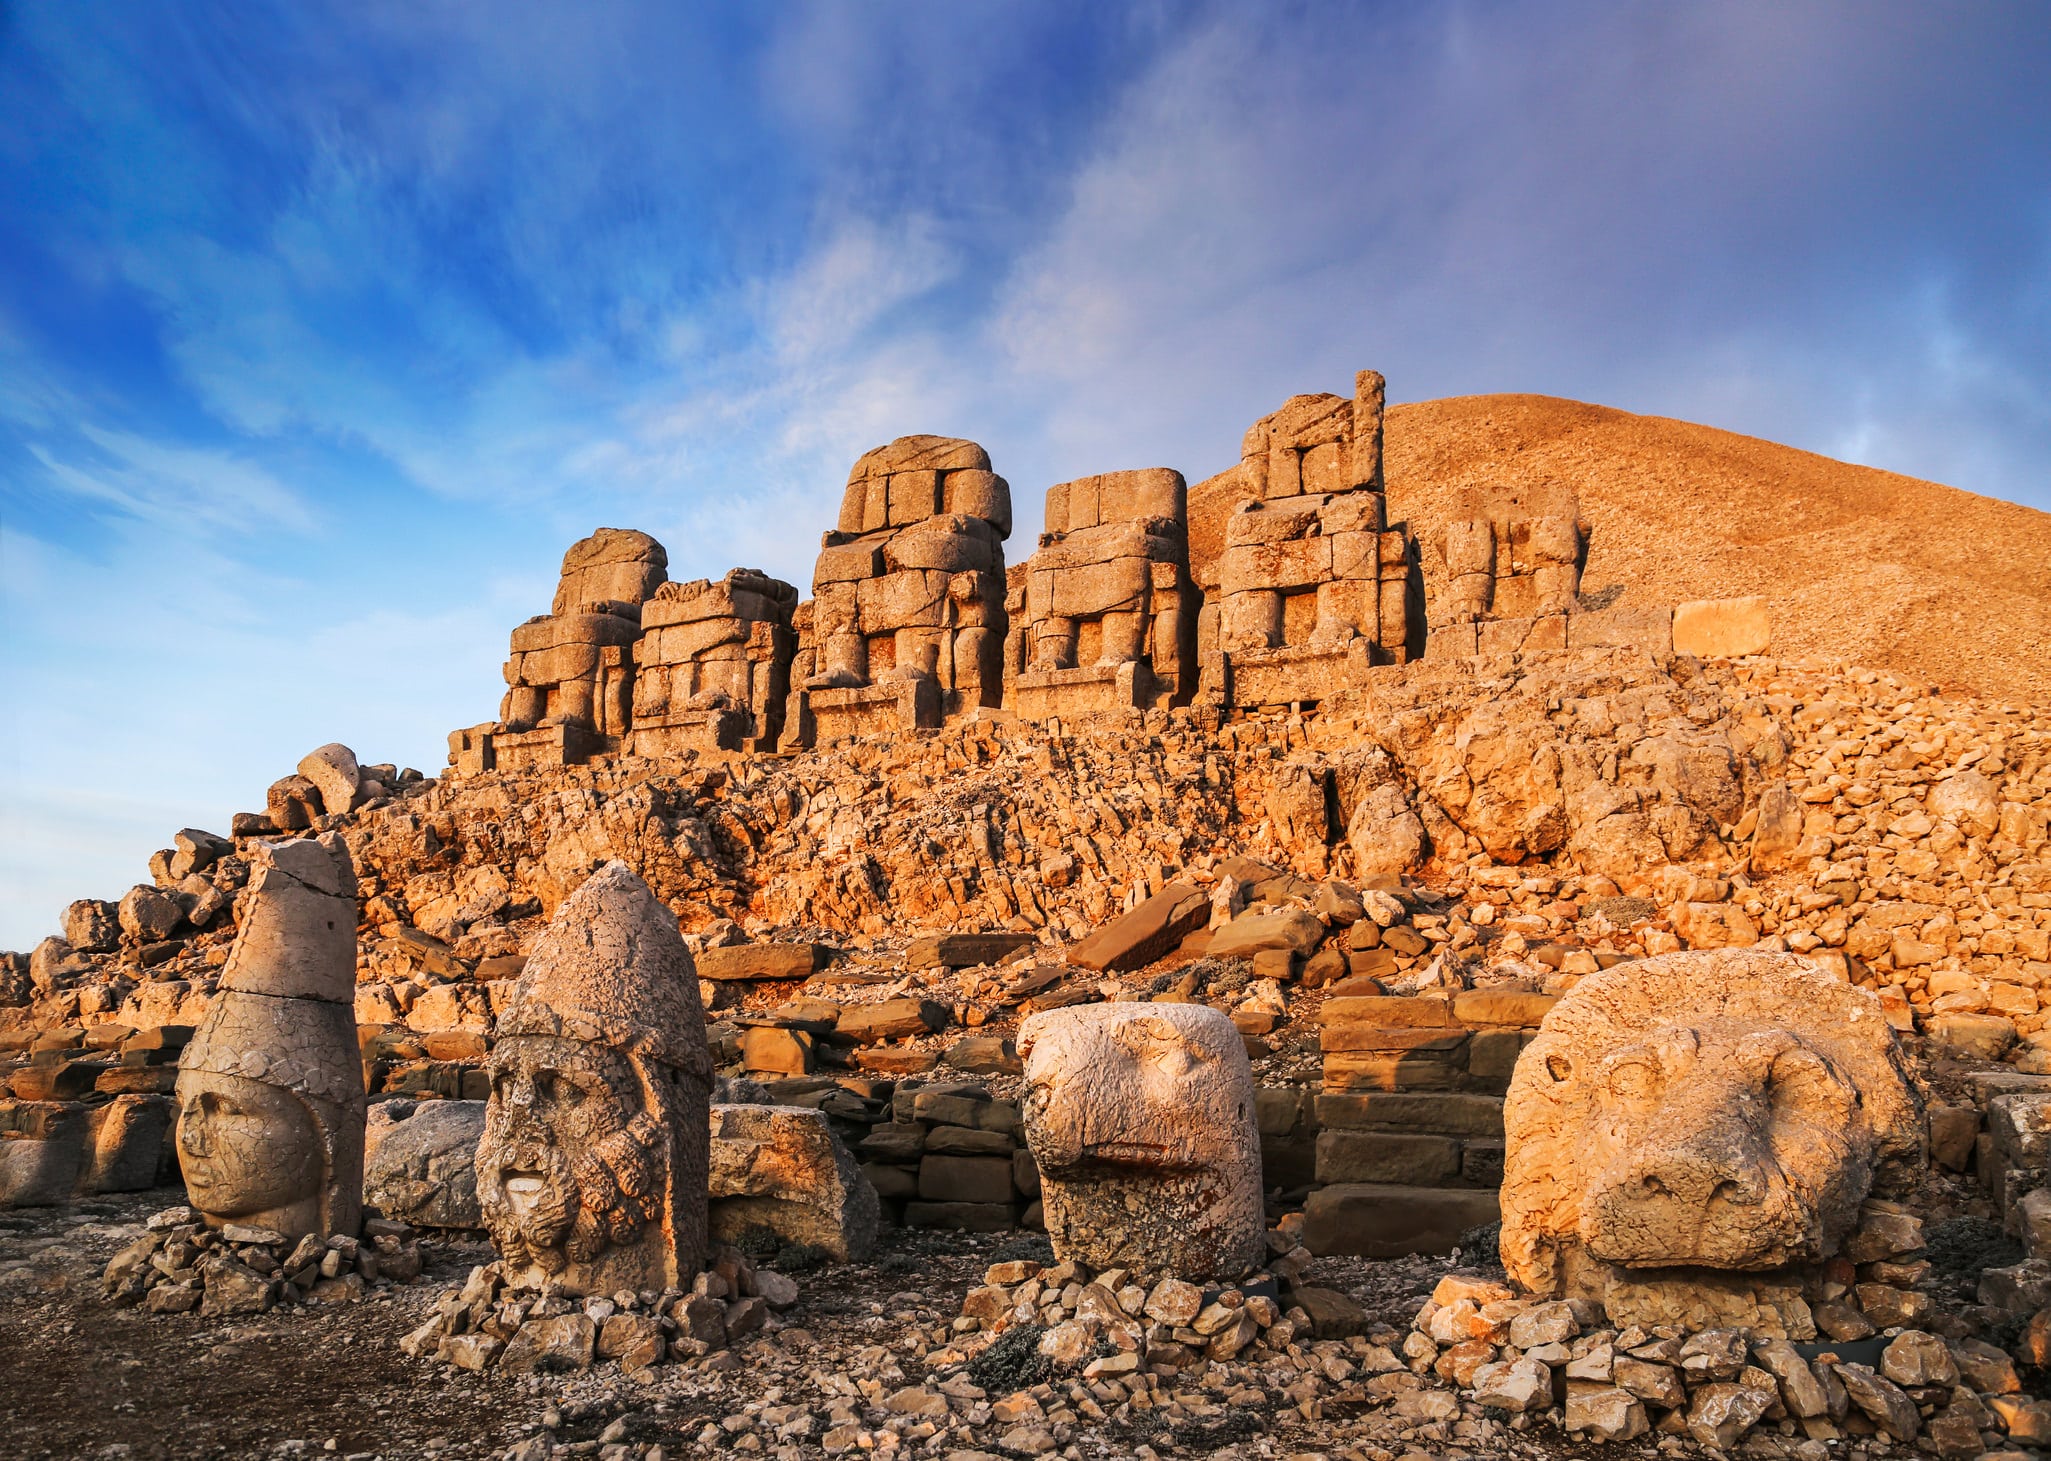 The statues surrounding the tomb of King Antiochus I on Mount Nemrut are a remarkable sight. These massive sculptures, dating back to the 1st century BCE, reflect the grandeur and artistic fusion of the Commagene Kingdom. A visit to this historical site offers a captivating glimpse into the ancient world and its enduring legacy.